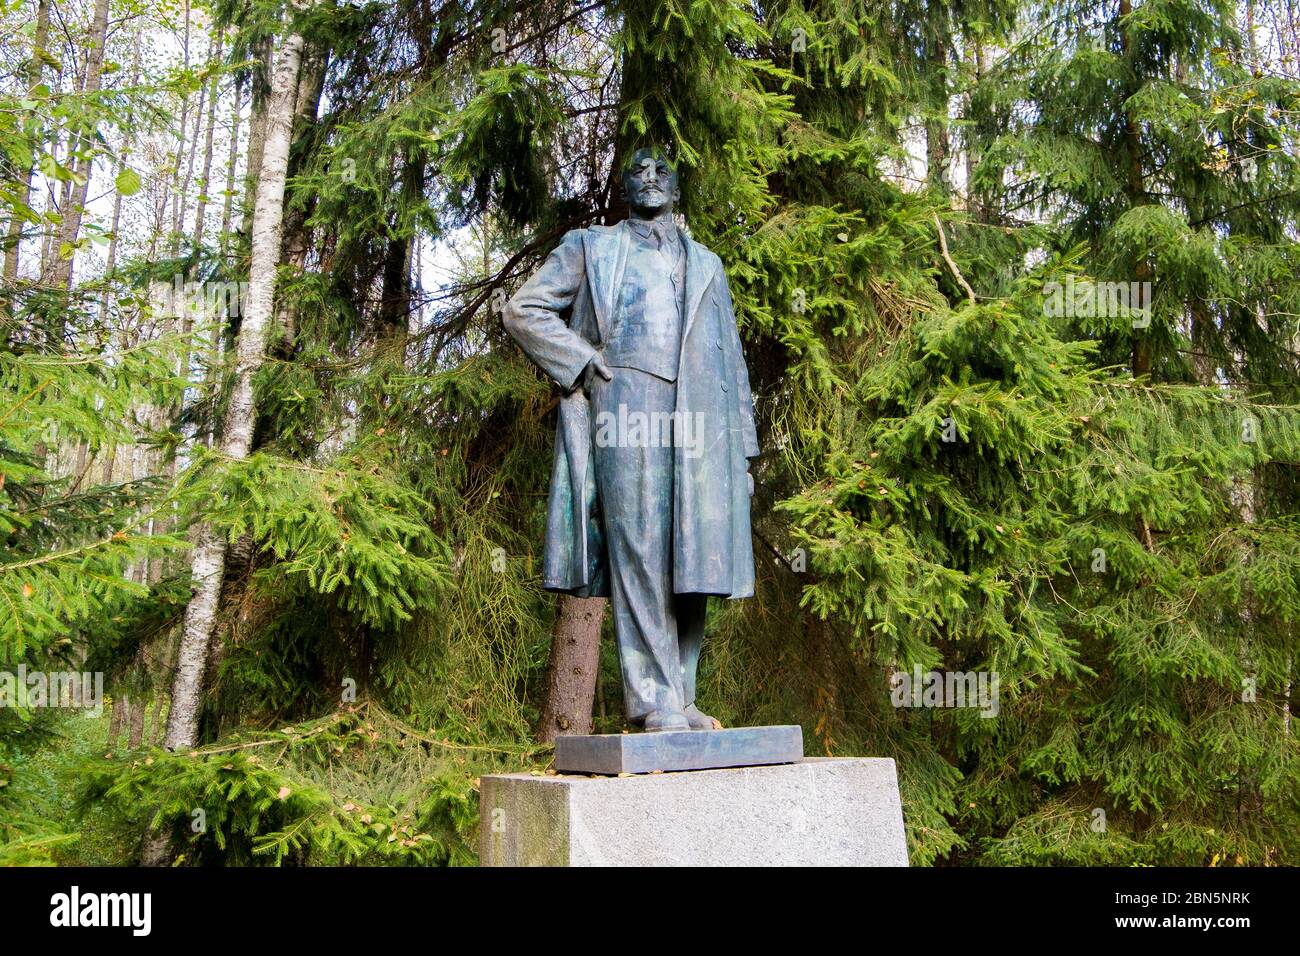 A large bronze statue of Lenin, partially obscured by trees. At Gruto Parkas near Druskininkai, Lithuania. Stock Photo